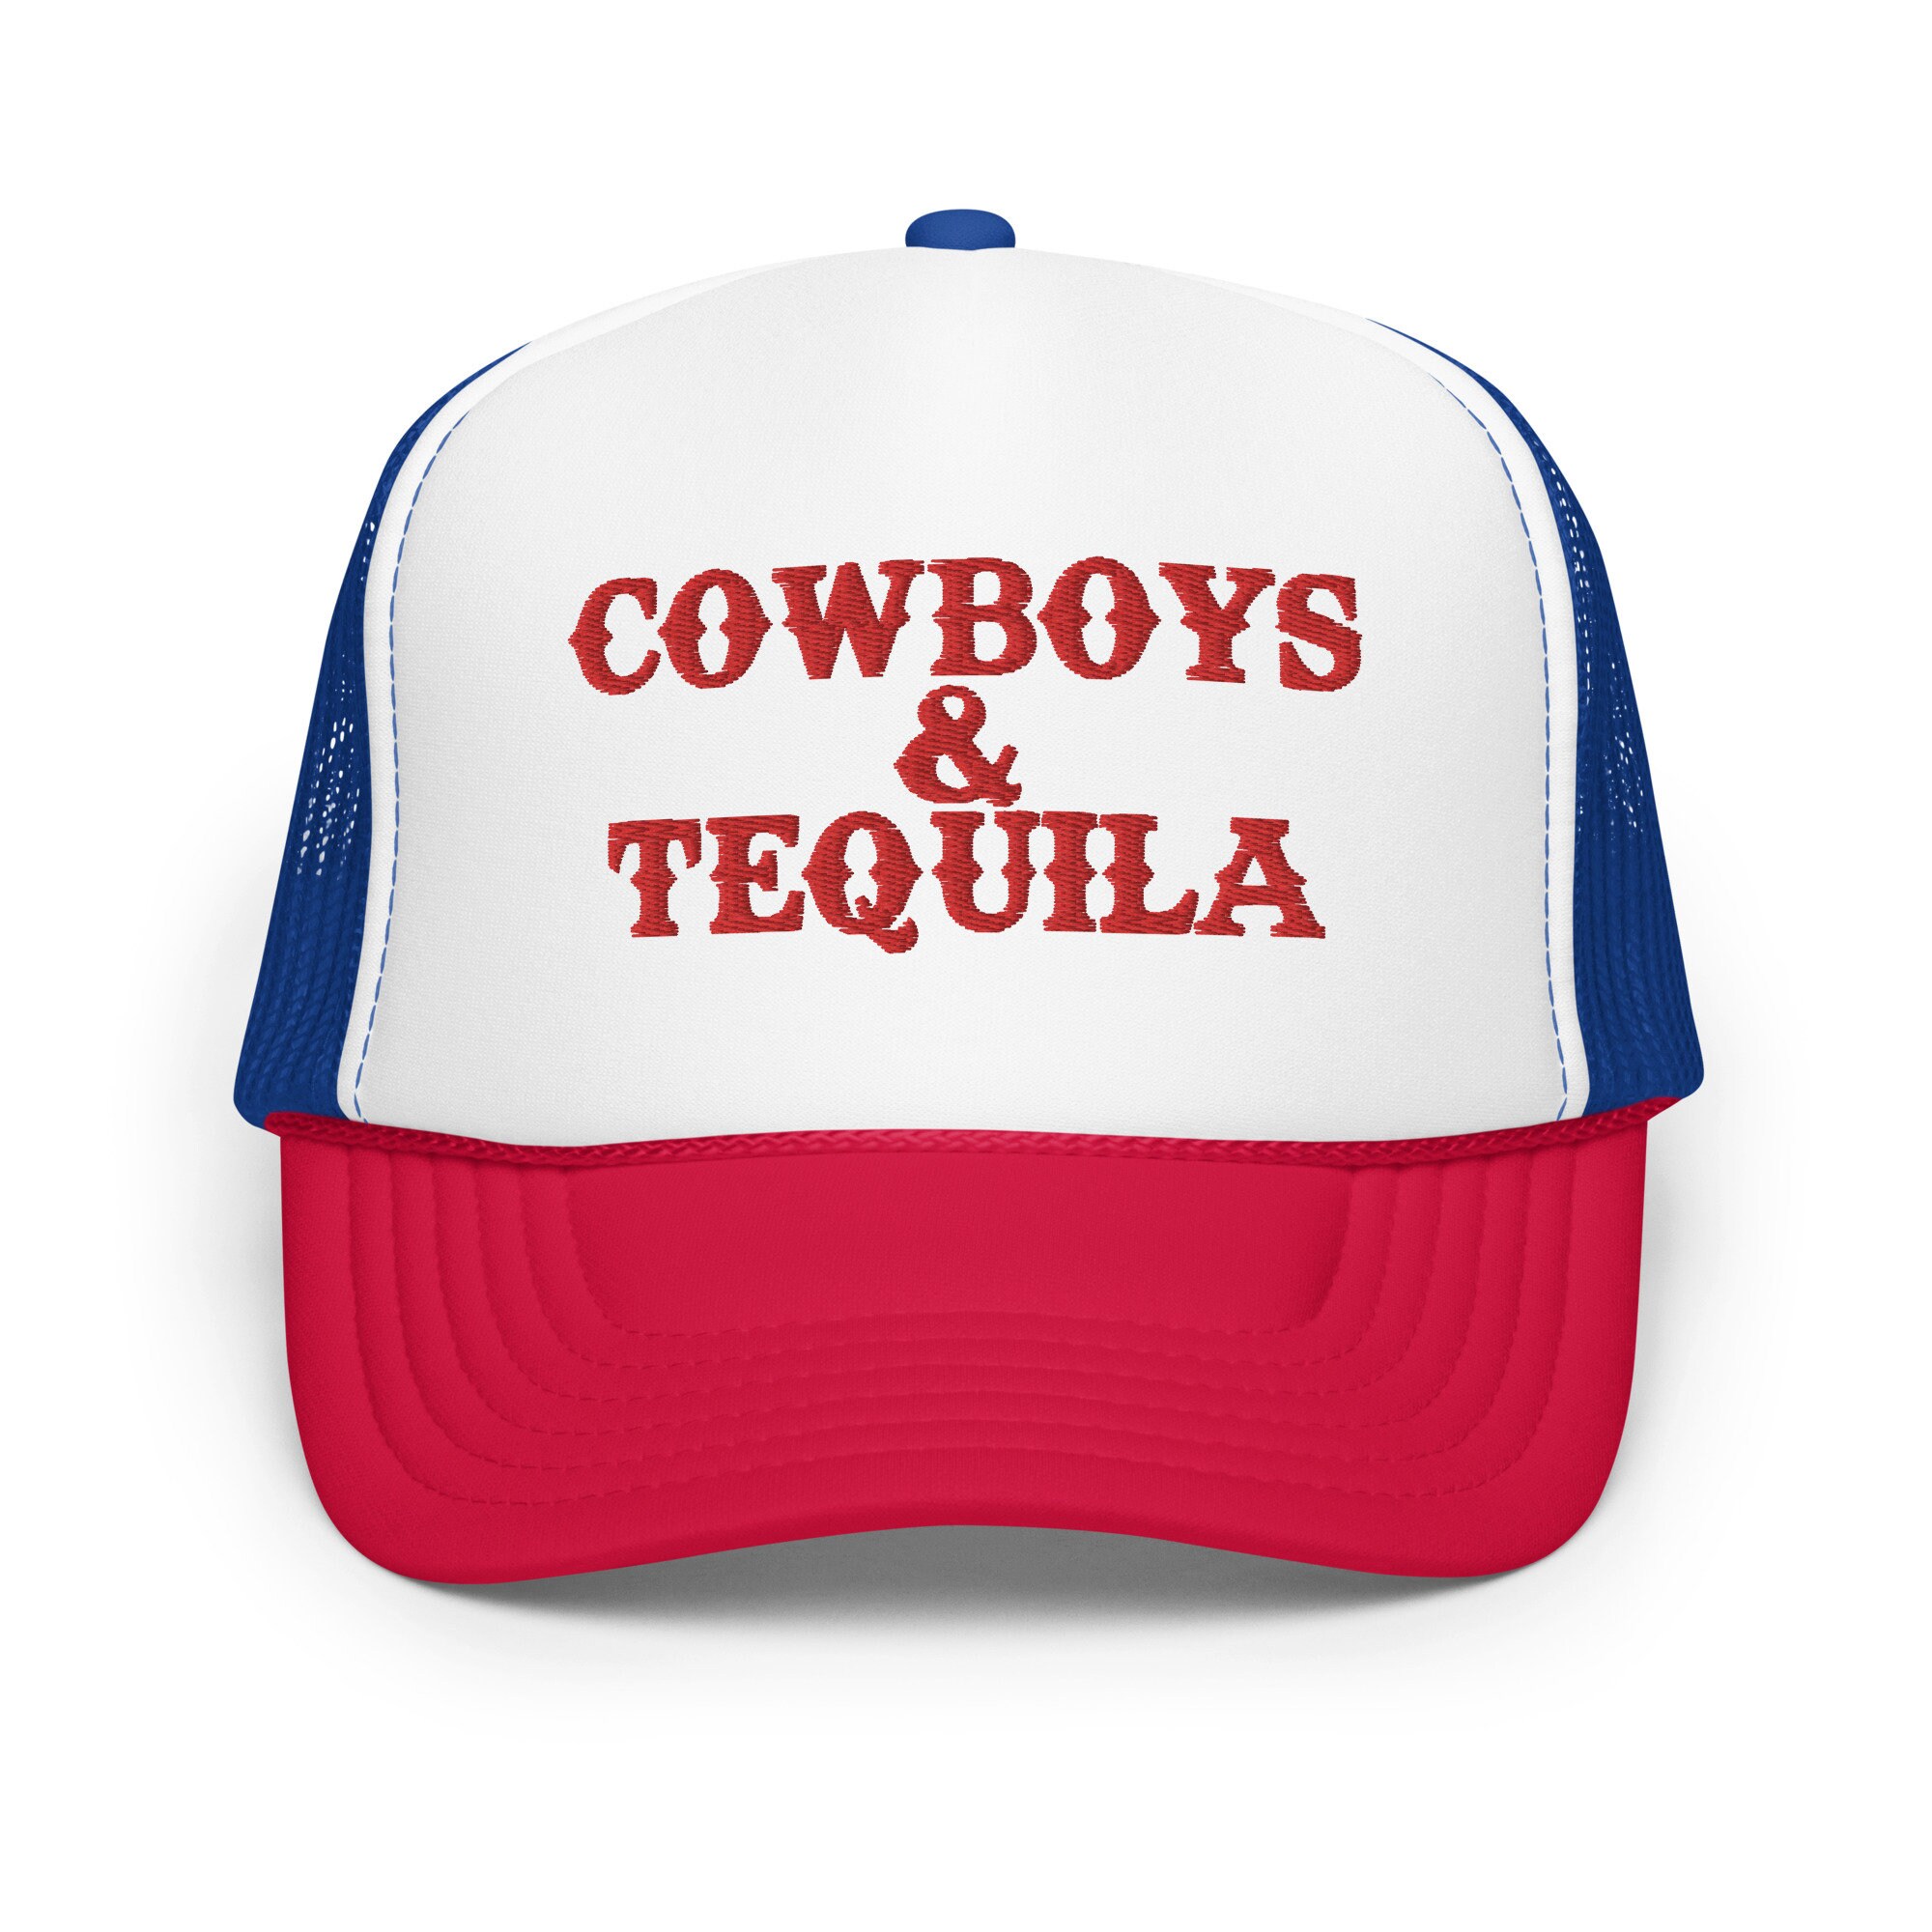 Discover Cowboys & Tequila Trucker Hat, Vintage Budlight Cowboy Hat, Western Trucker Hat, Country music concert